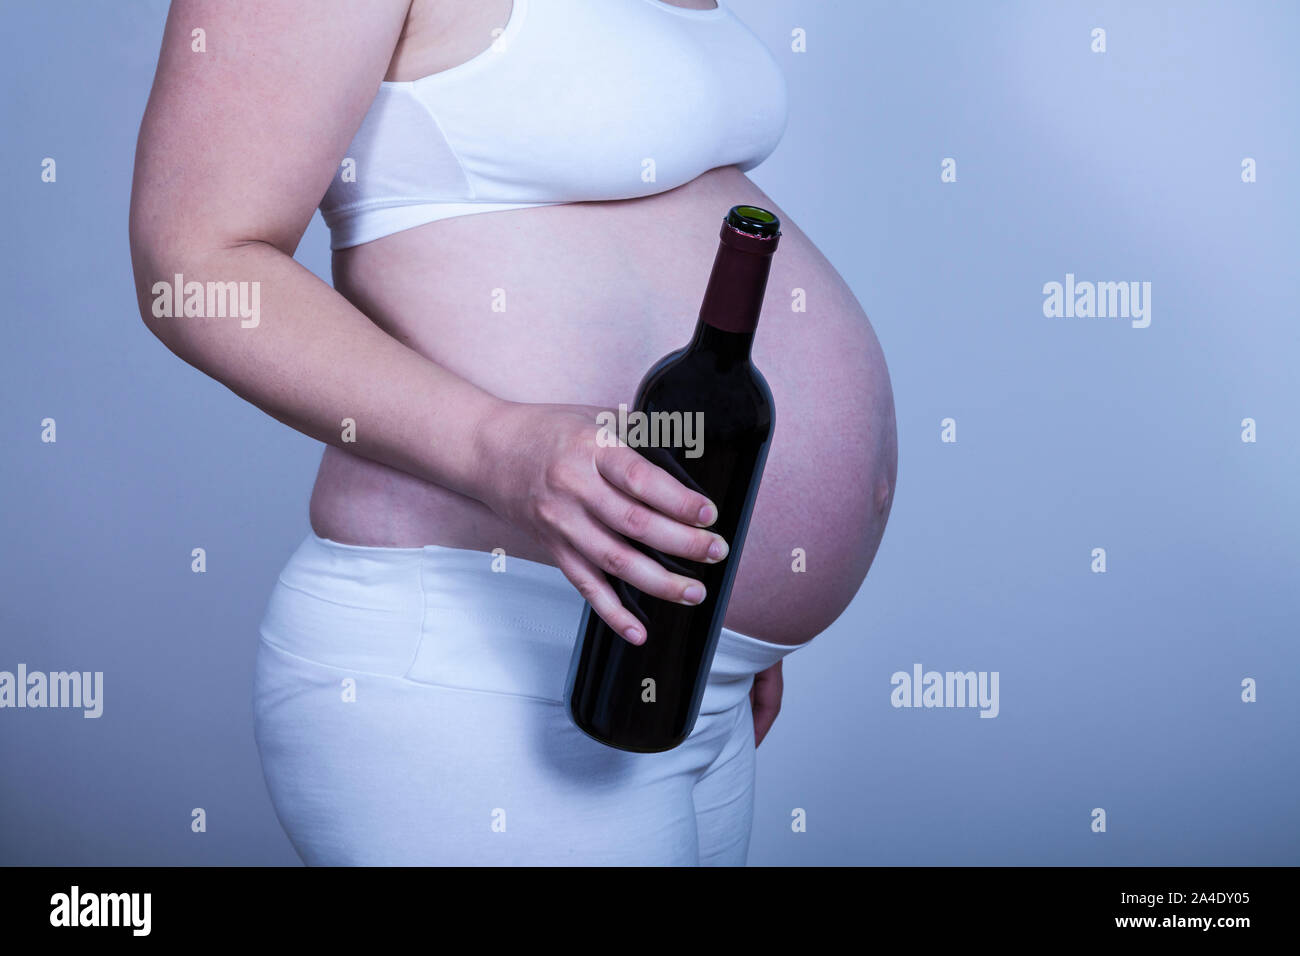 Pregnant woman holdin a bottle of wine in her hand Stock Photo